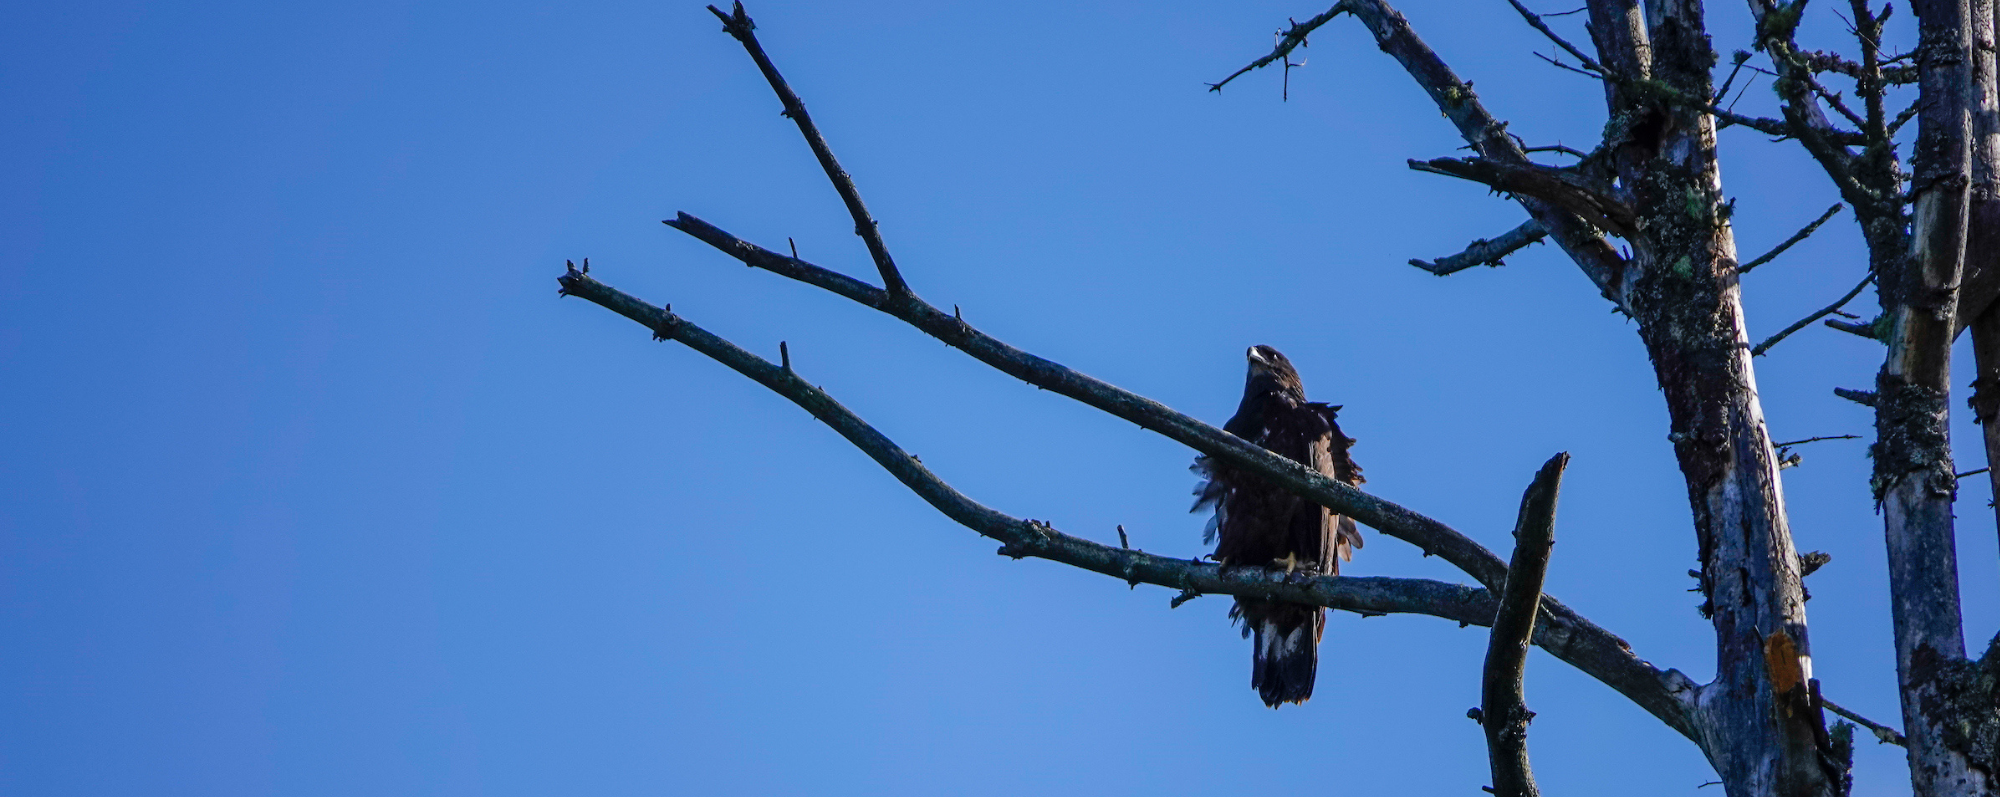 A Bald Eagle in a tree along the banks of Raquette River, Tupper Lake, NY